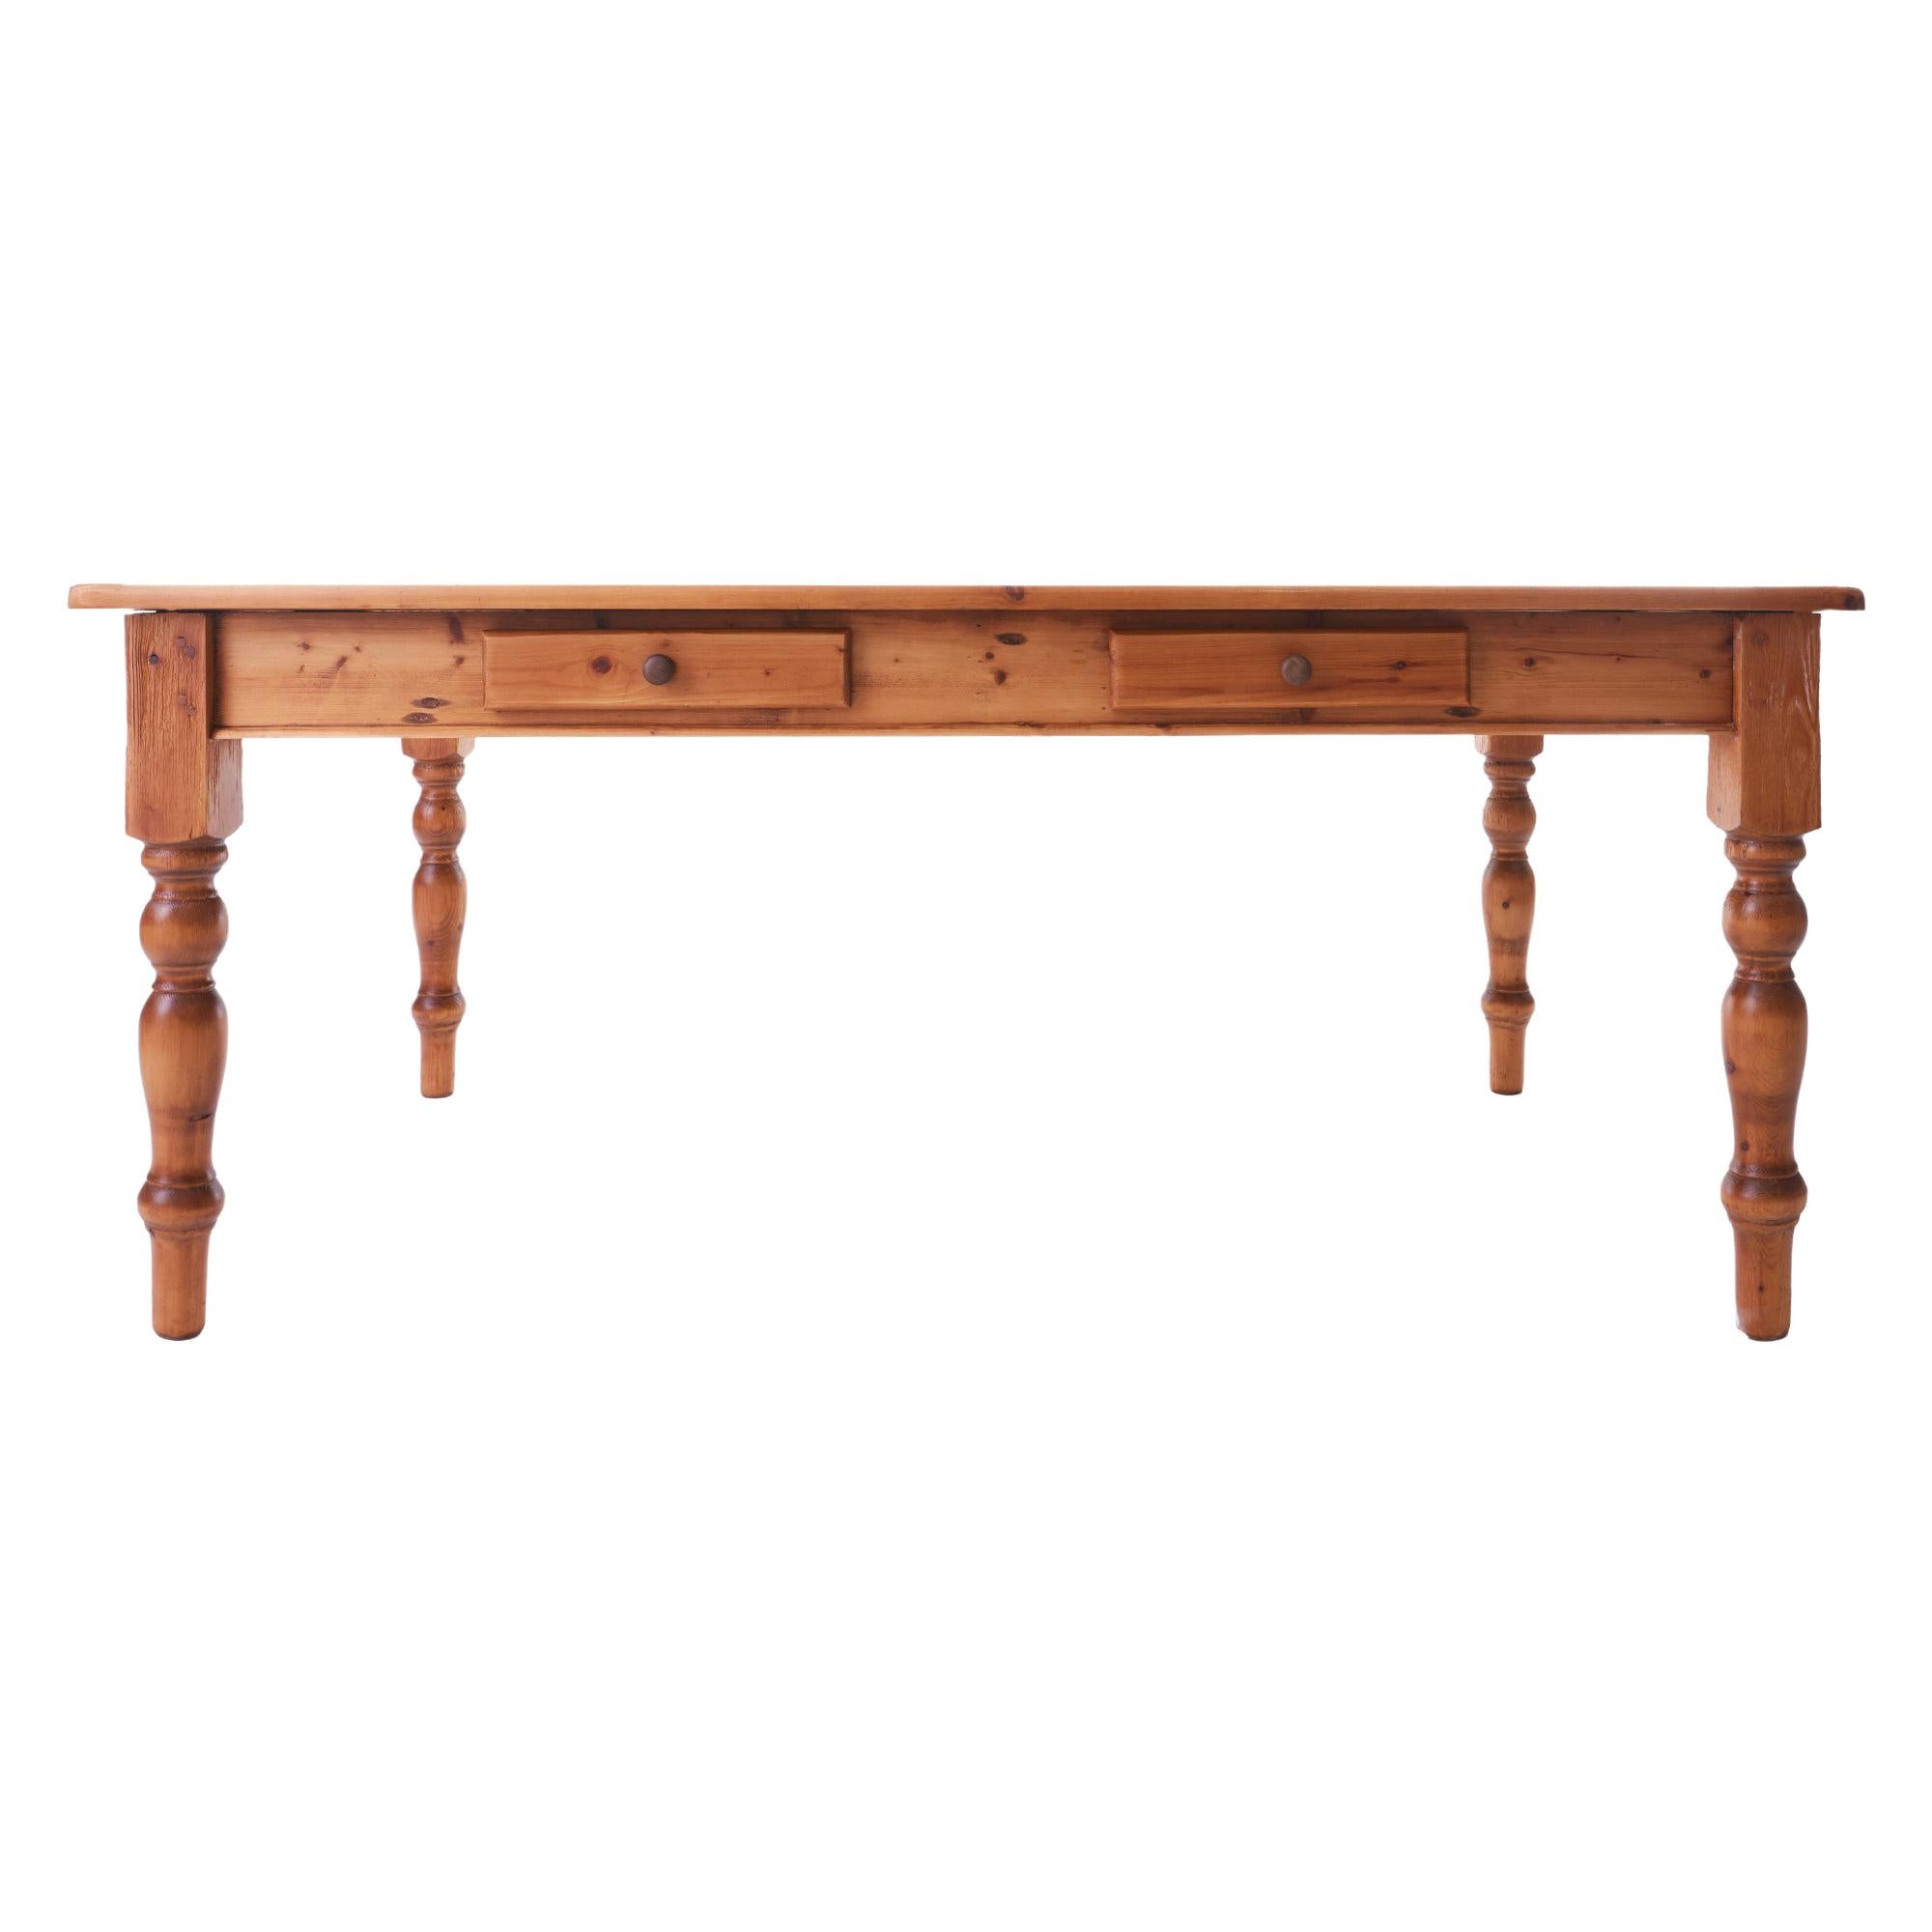 Rustic 20th Century Pine Farm Dining Table With Turned Legs and Drawers